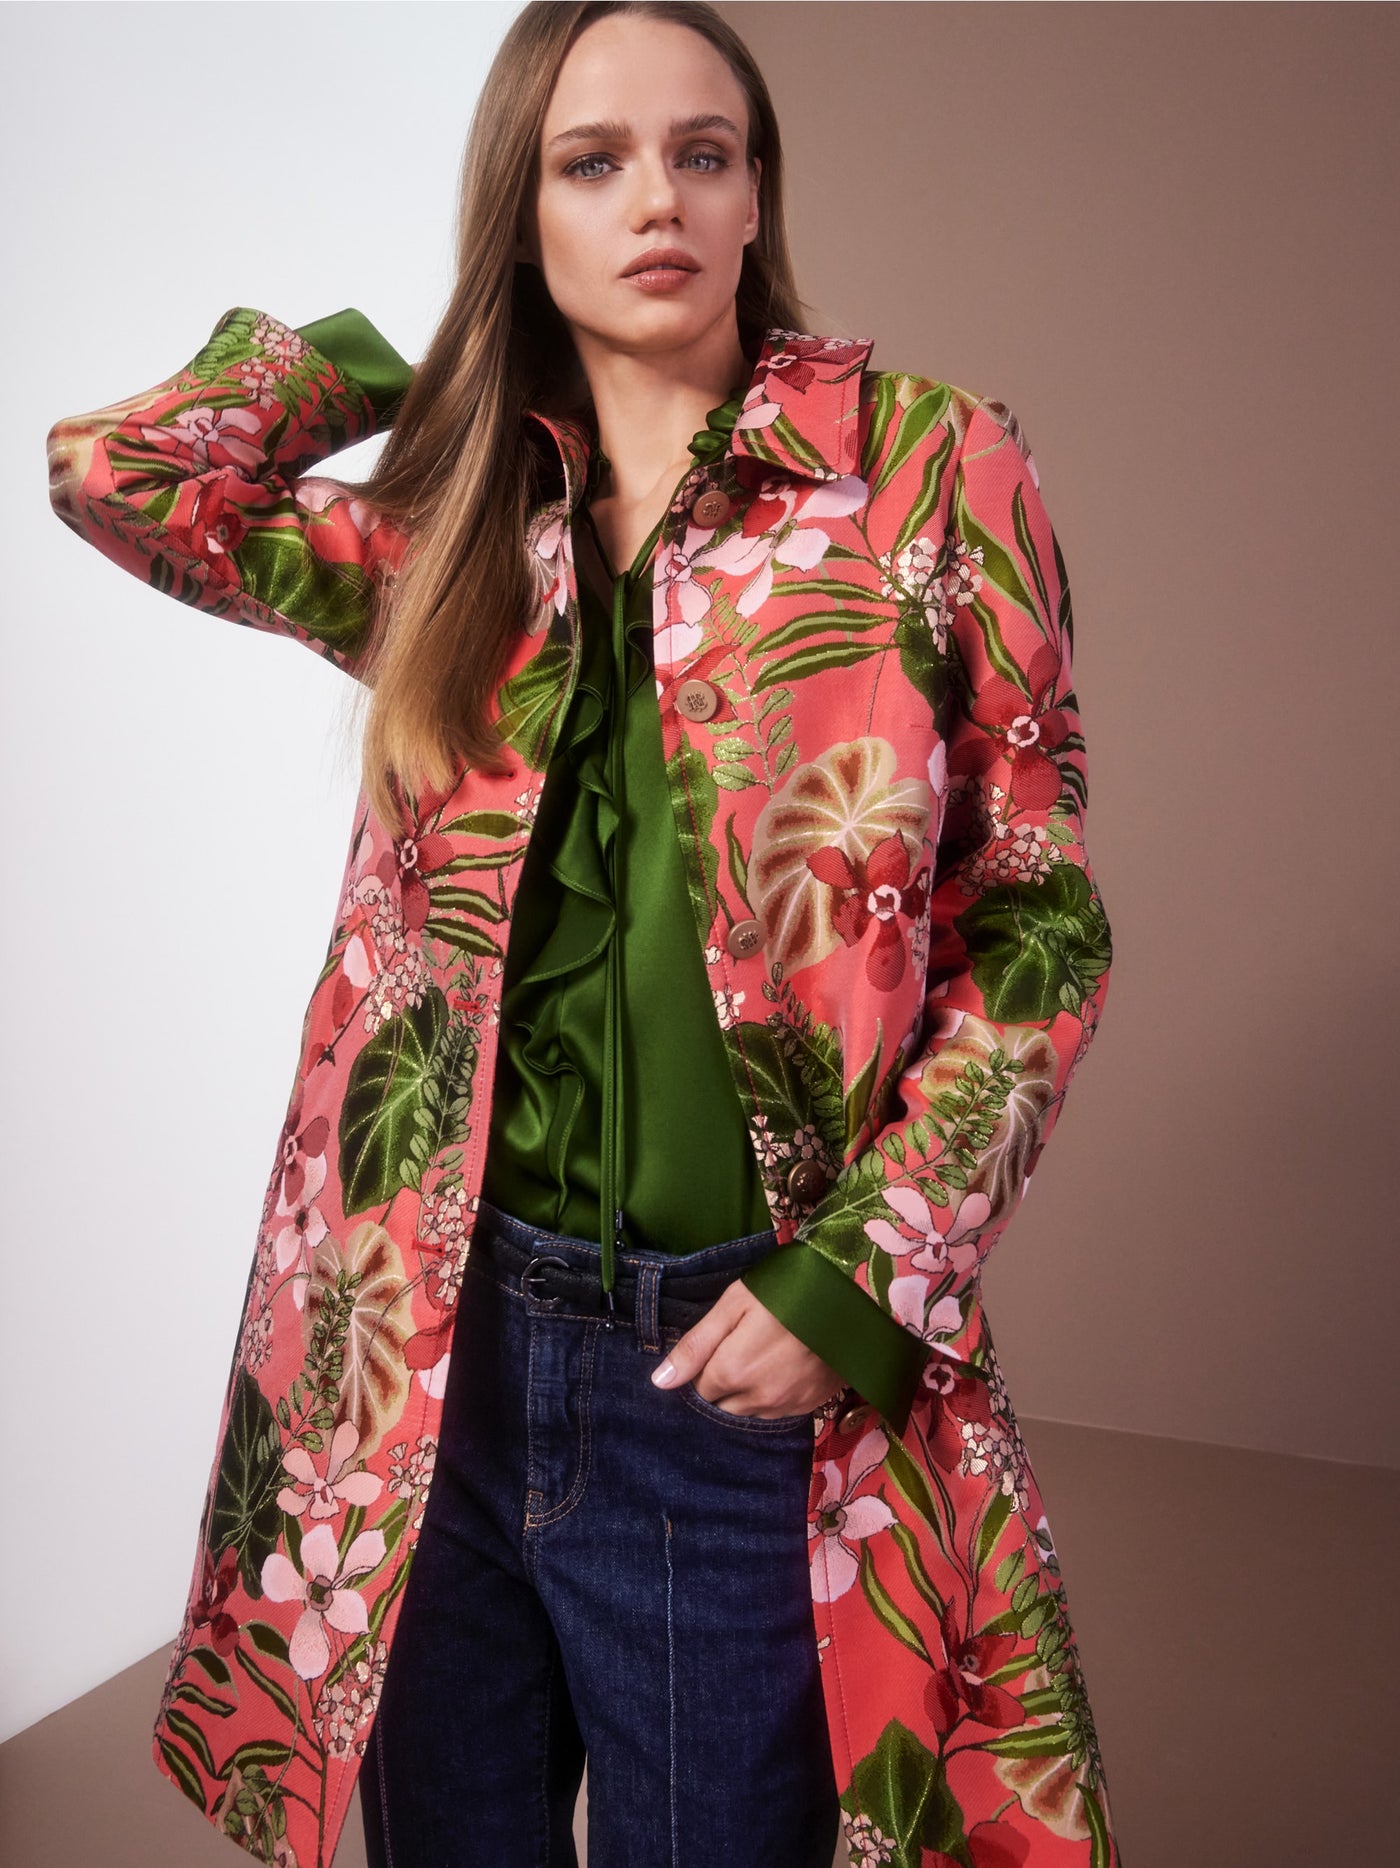 Coat with Floral Design - Red